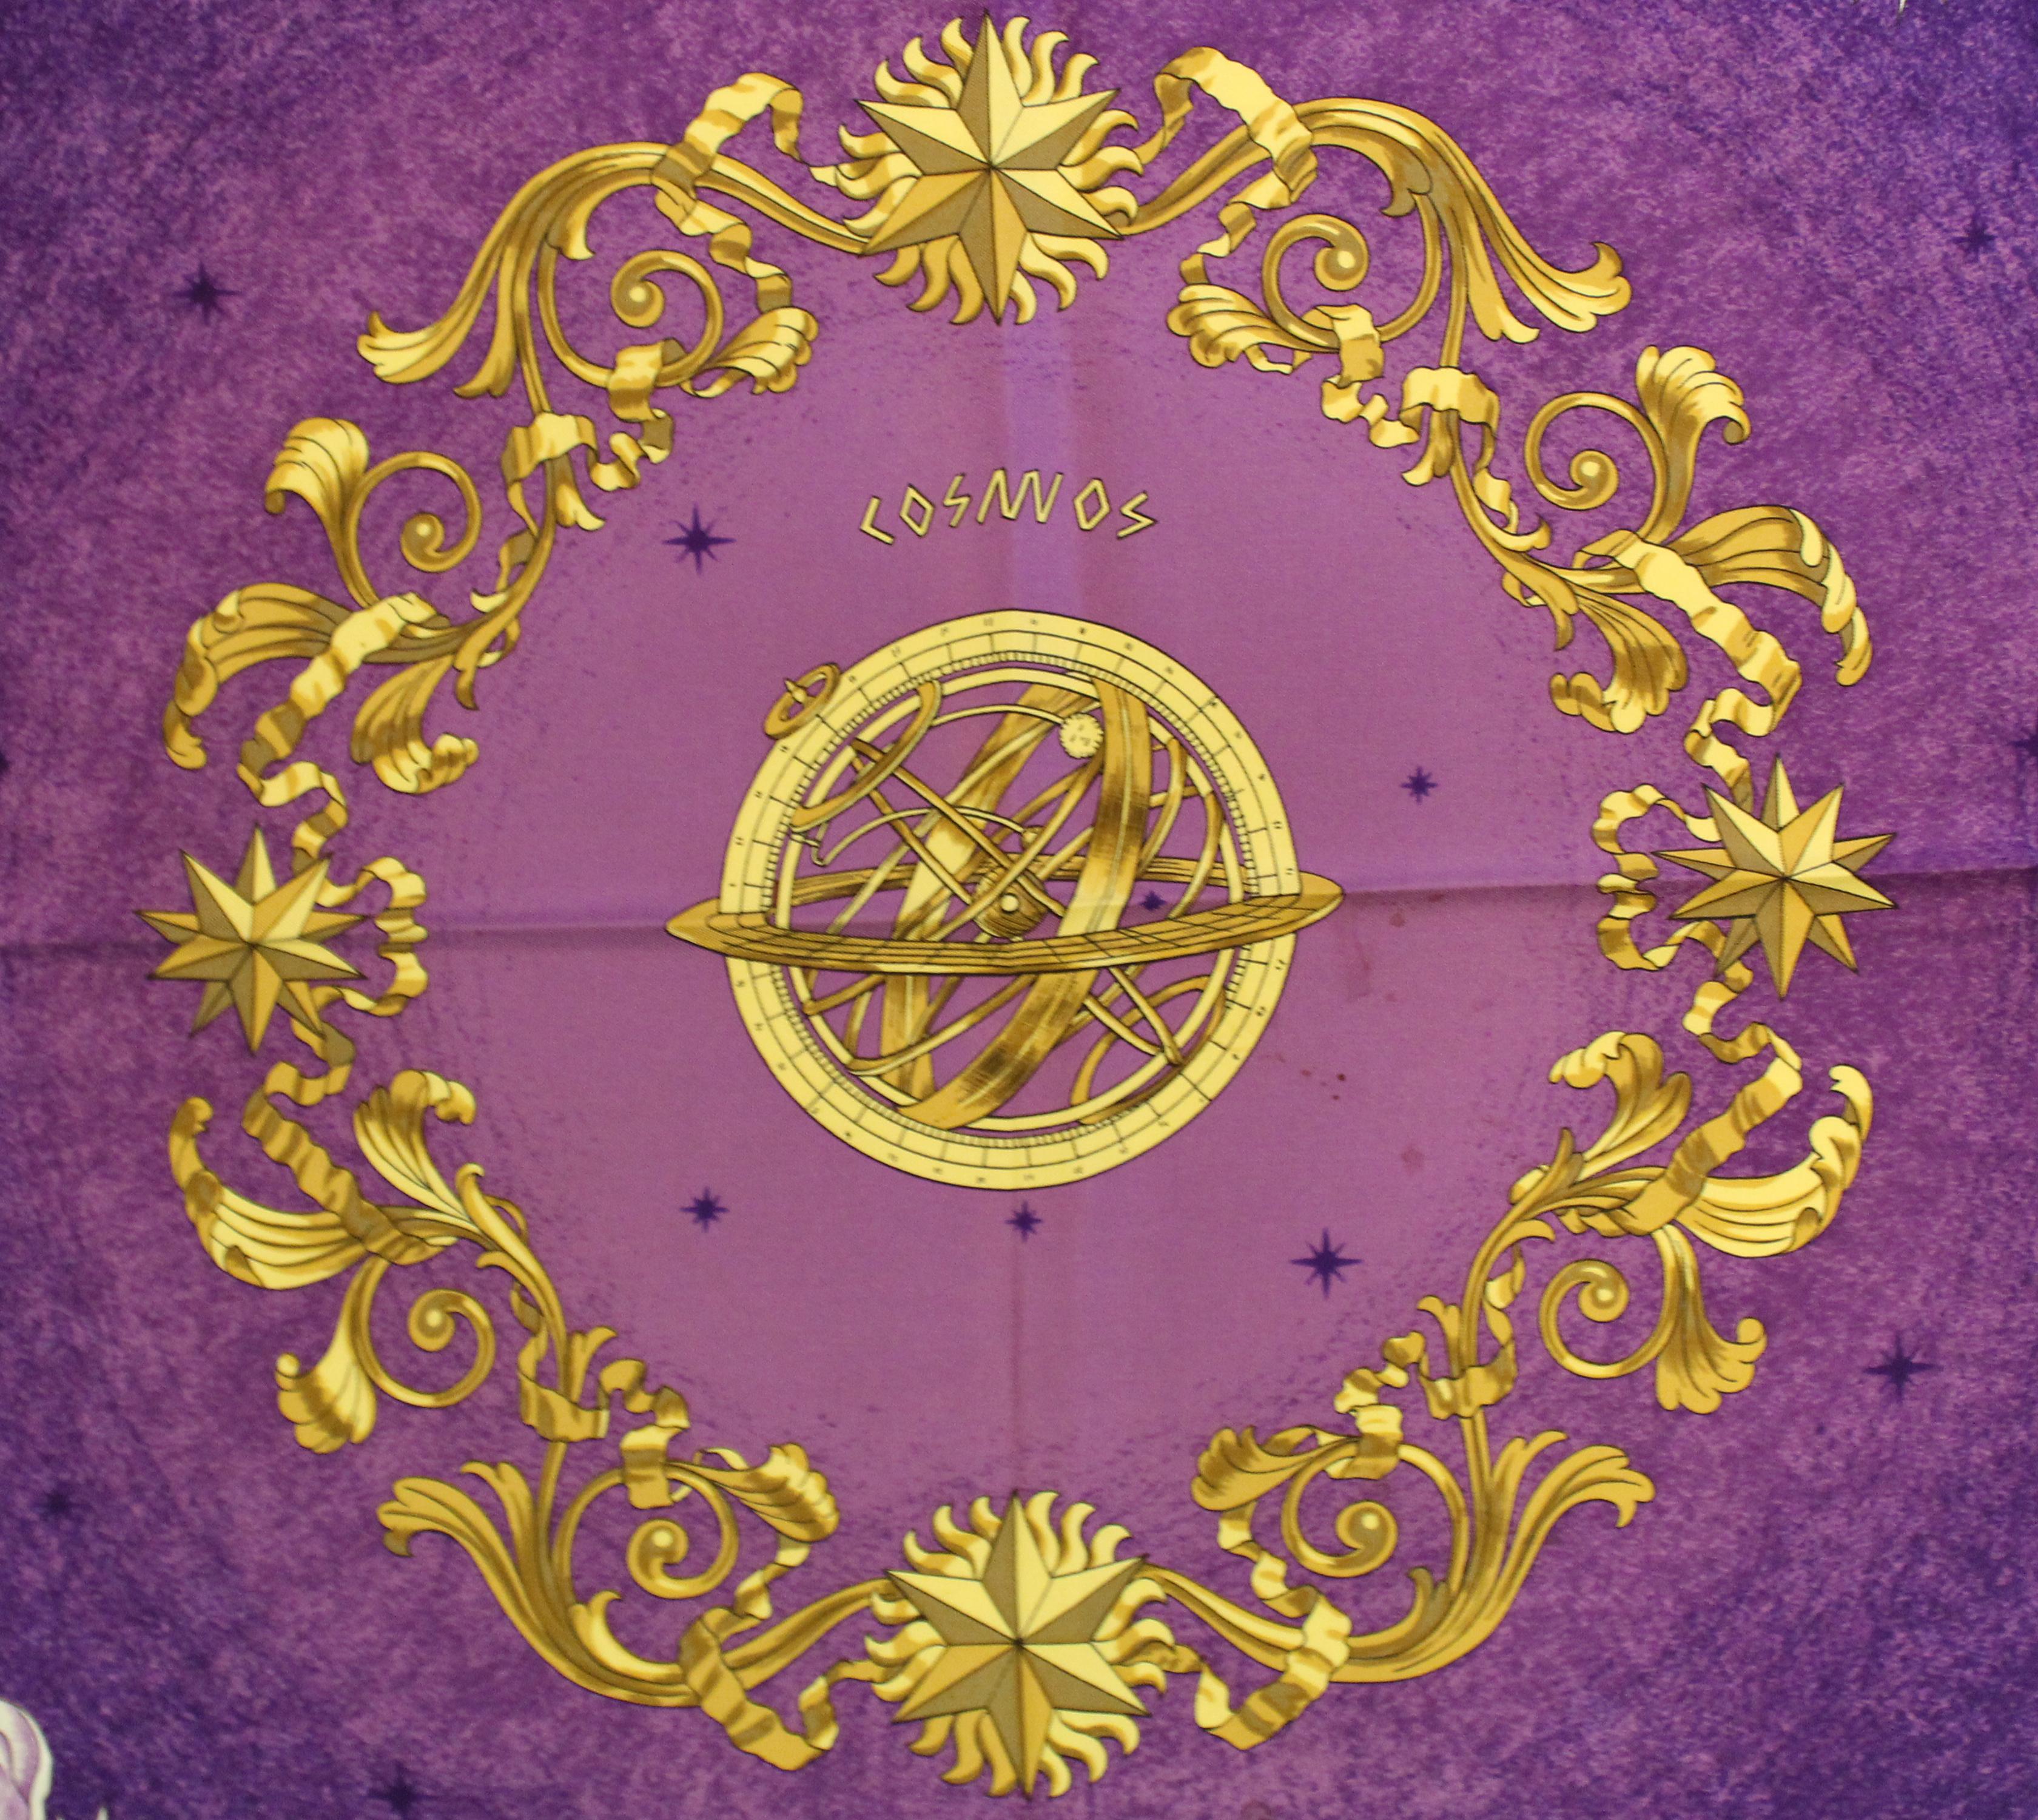 This Hermes scarf was created by none other than Philippe Ledoux, who has been a favorite designer of the House of Hermes.  This Cosmos scarf in vibrant purple tones is beautifully designed.  Philippe Ledoux, it can be argued, has left a huge impact